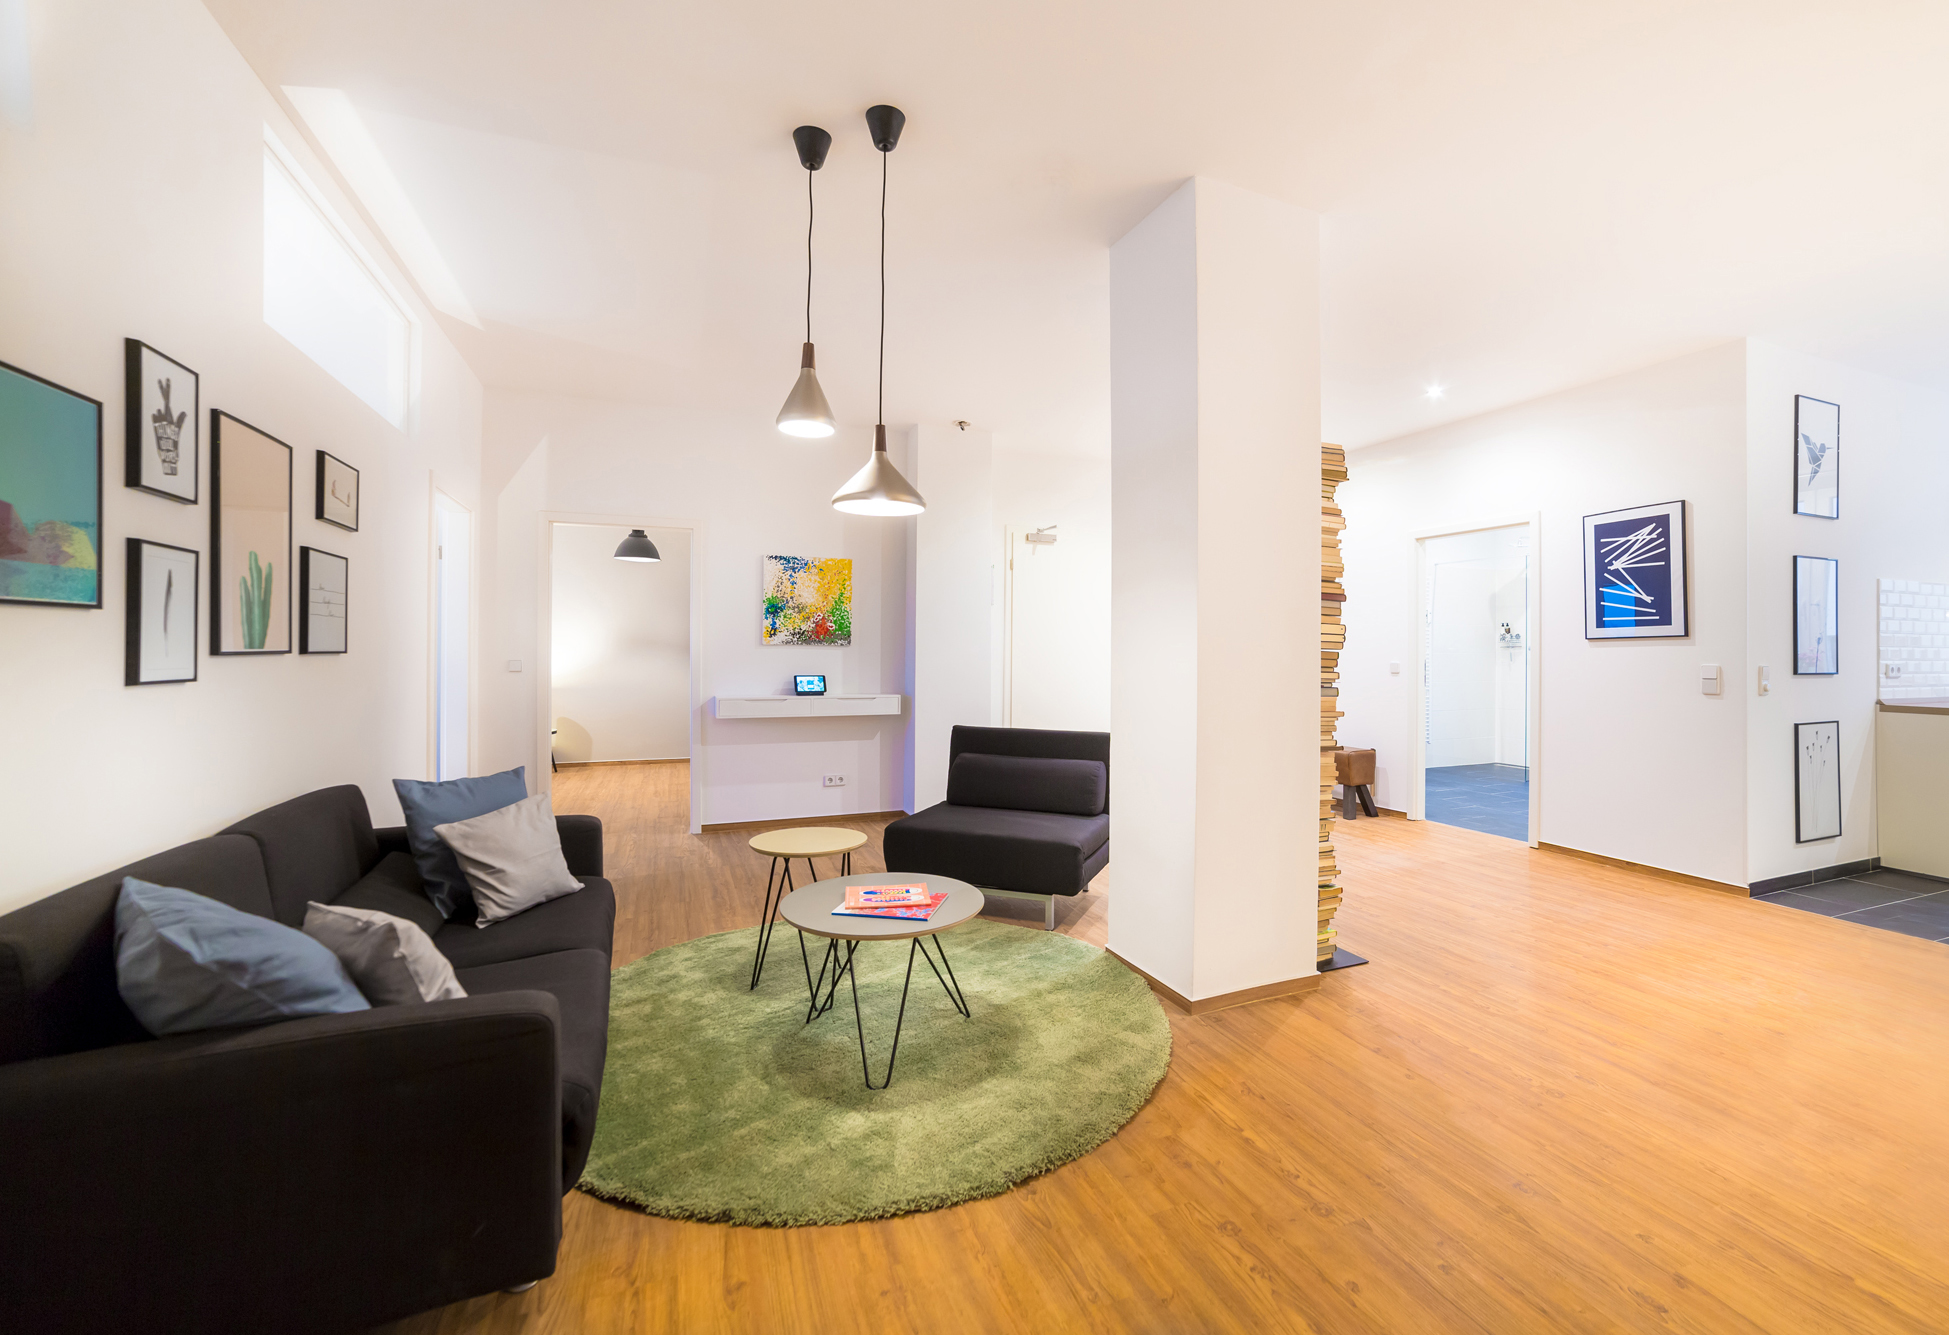 Penthouse (115sqm) with 3 Bedrooms & Balcony - Apartments for Rent in Berlin,  Berlin, Germany